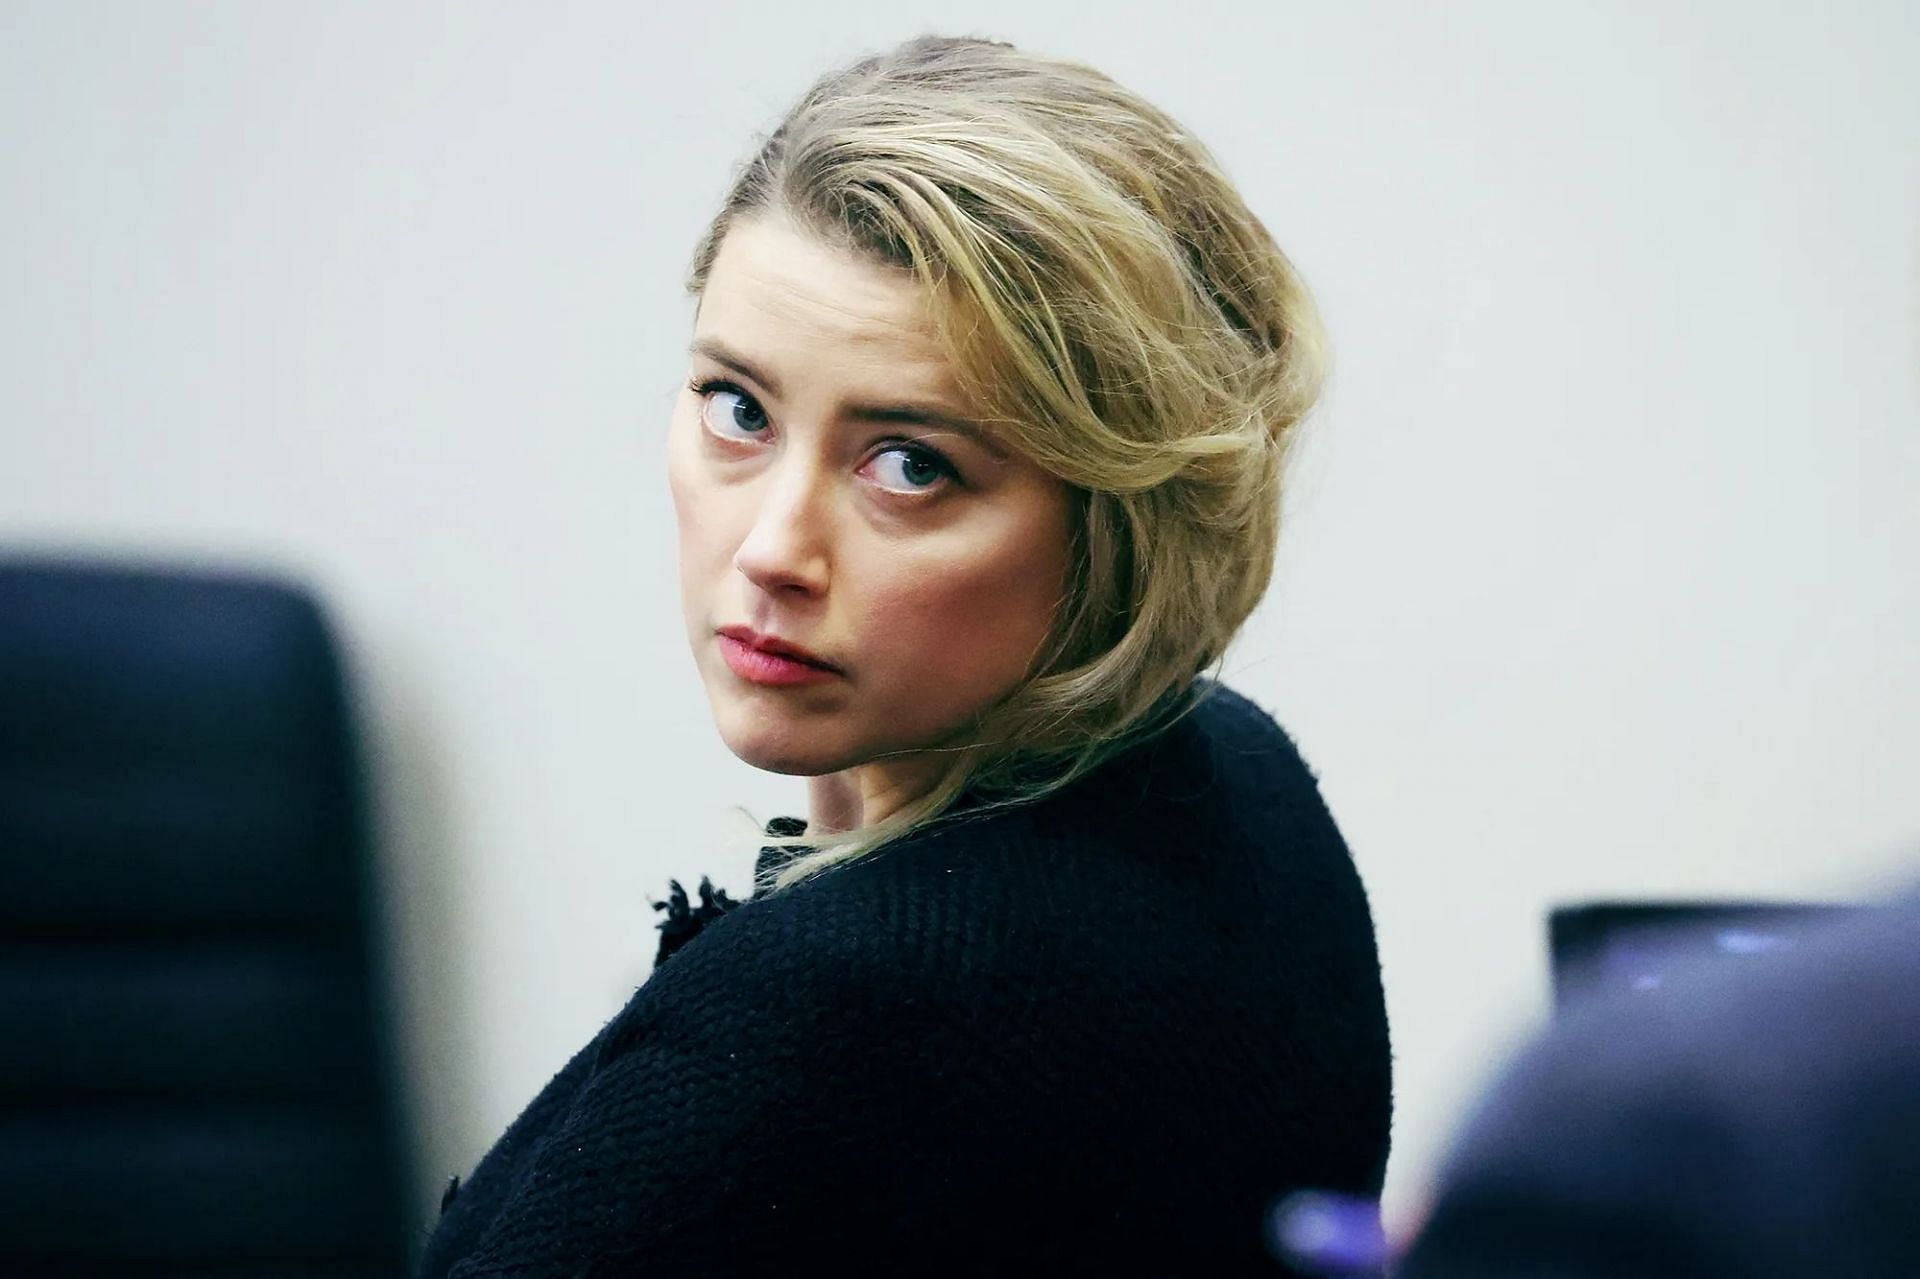 Amber Heard in the trial (Image via Michael Reynolds/Pool/AFP/Getty Images)